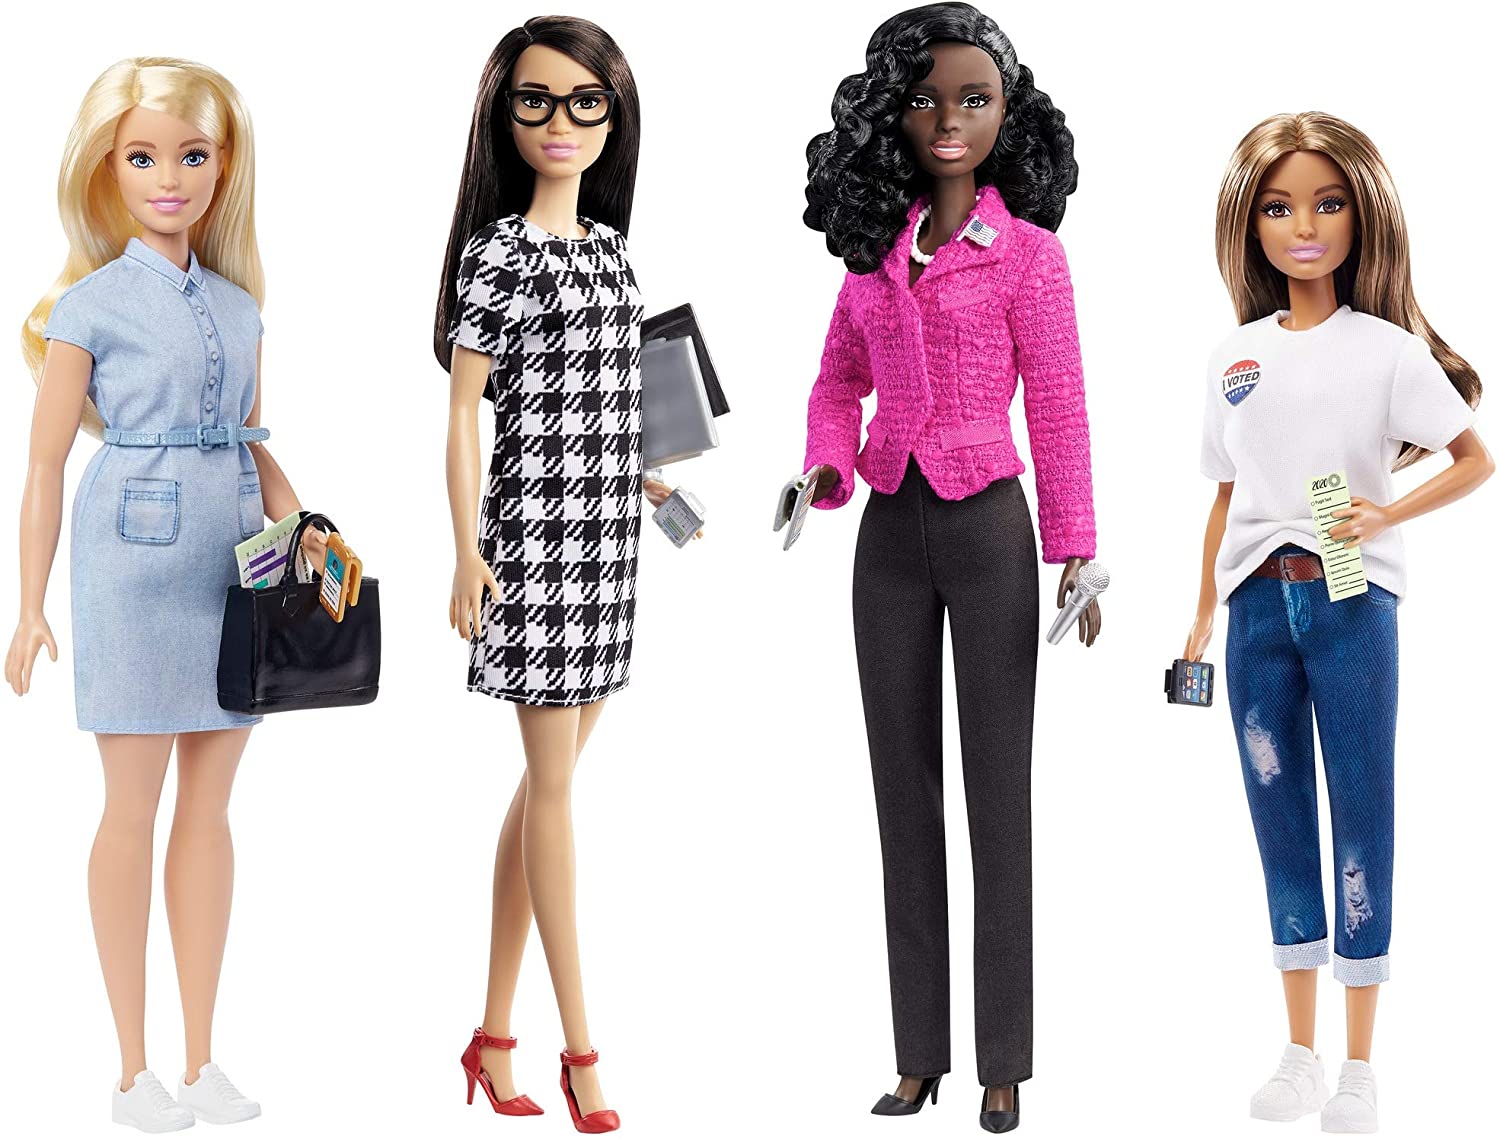 Barbie Campaign Team Giftset with Four 12-in/30.40-cm Dolls & Accessories